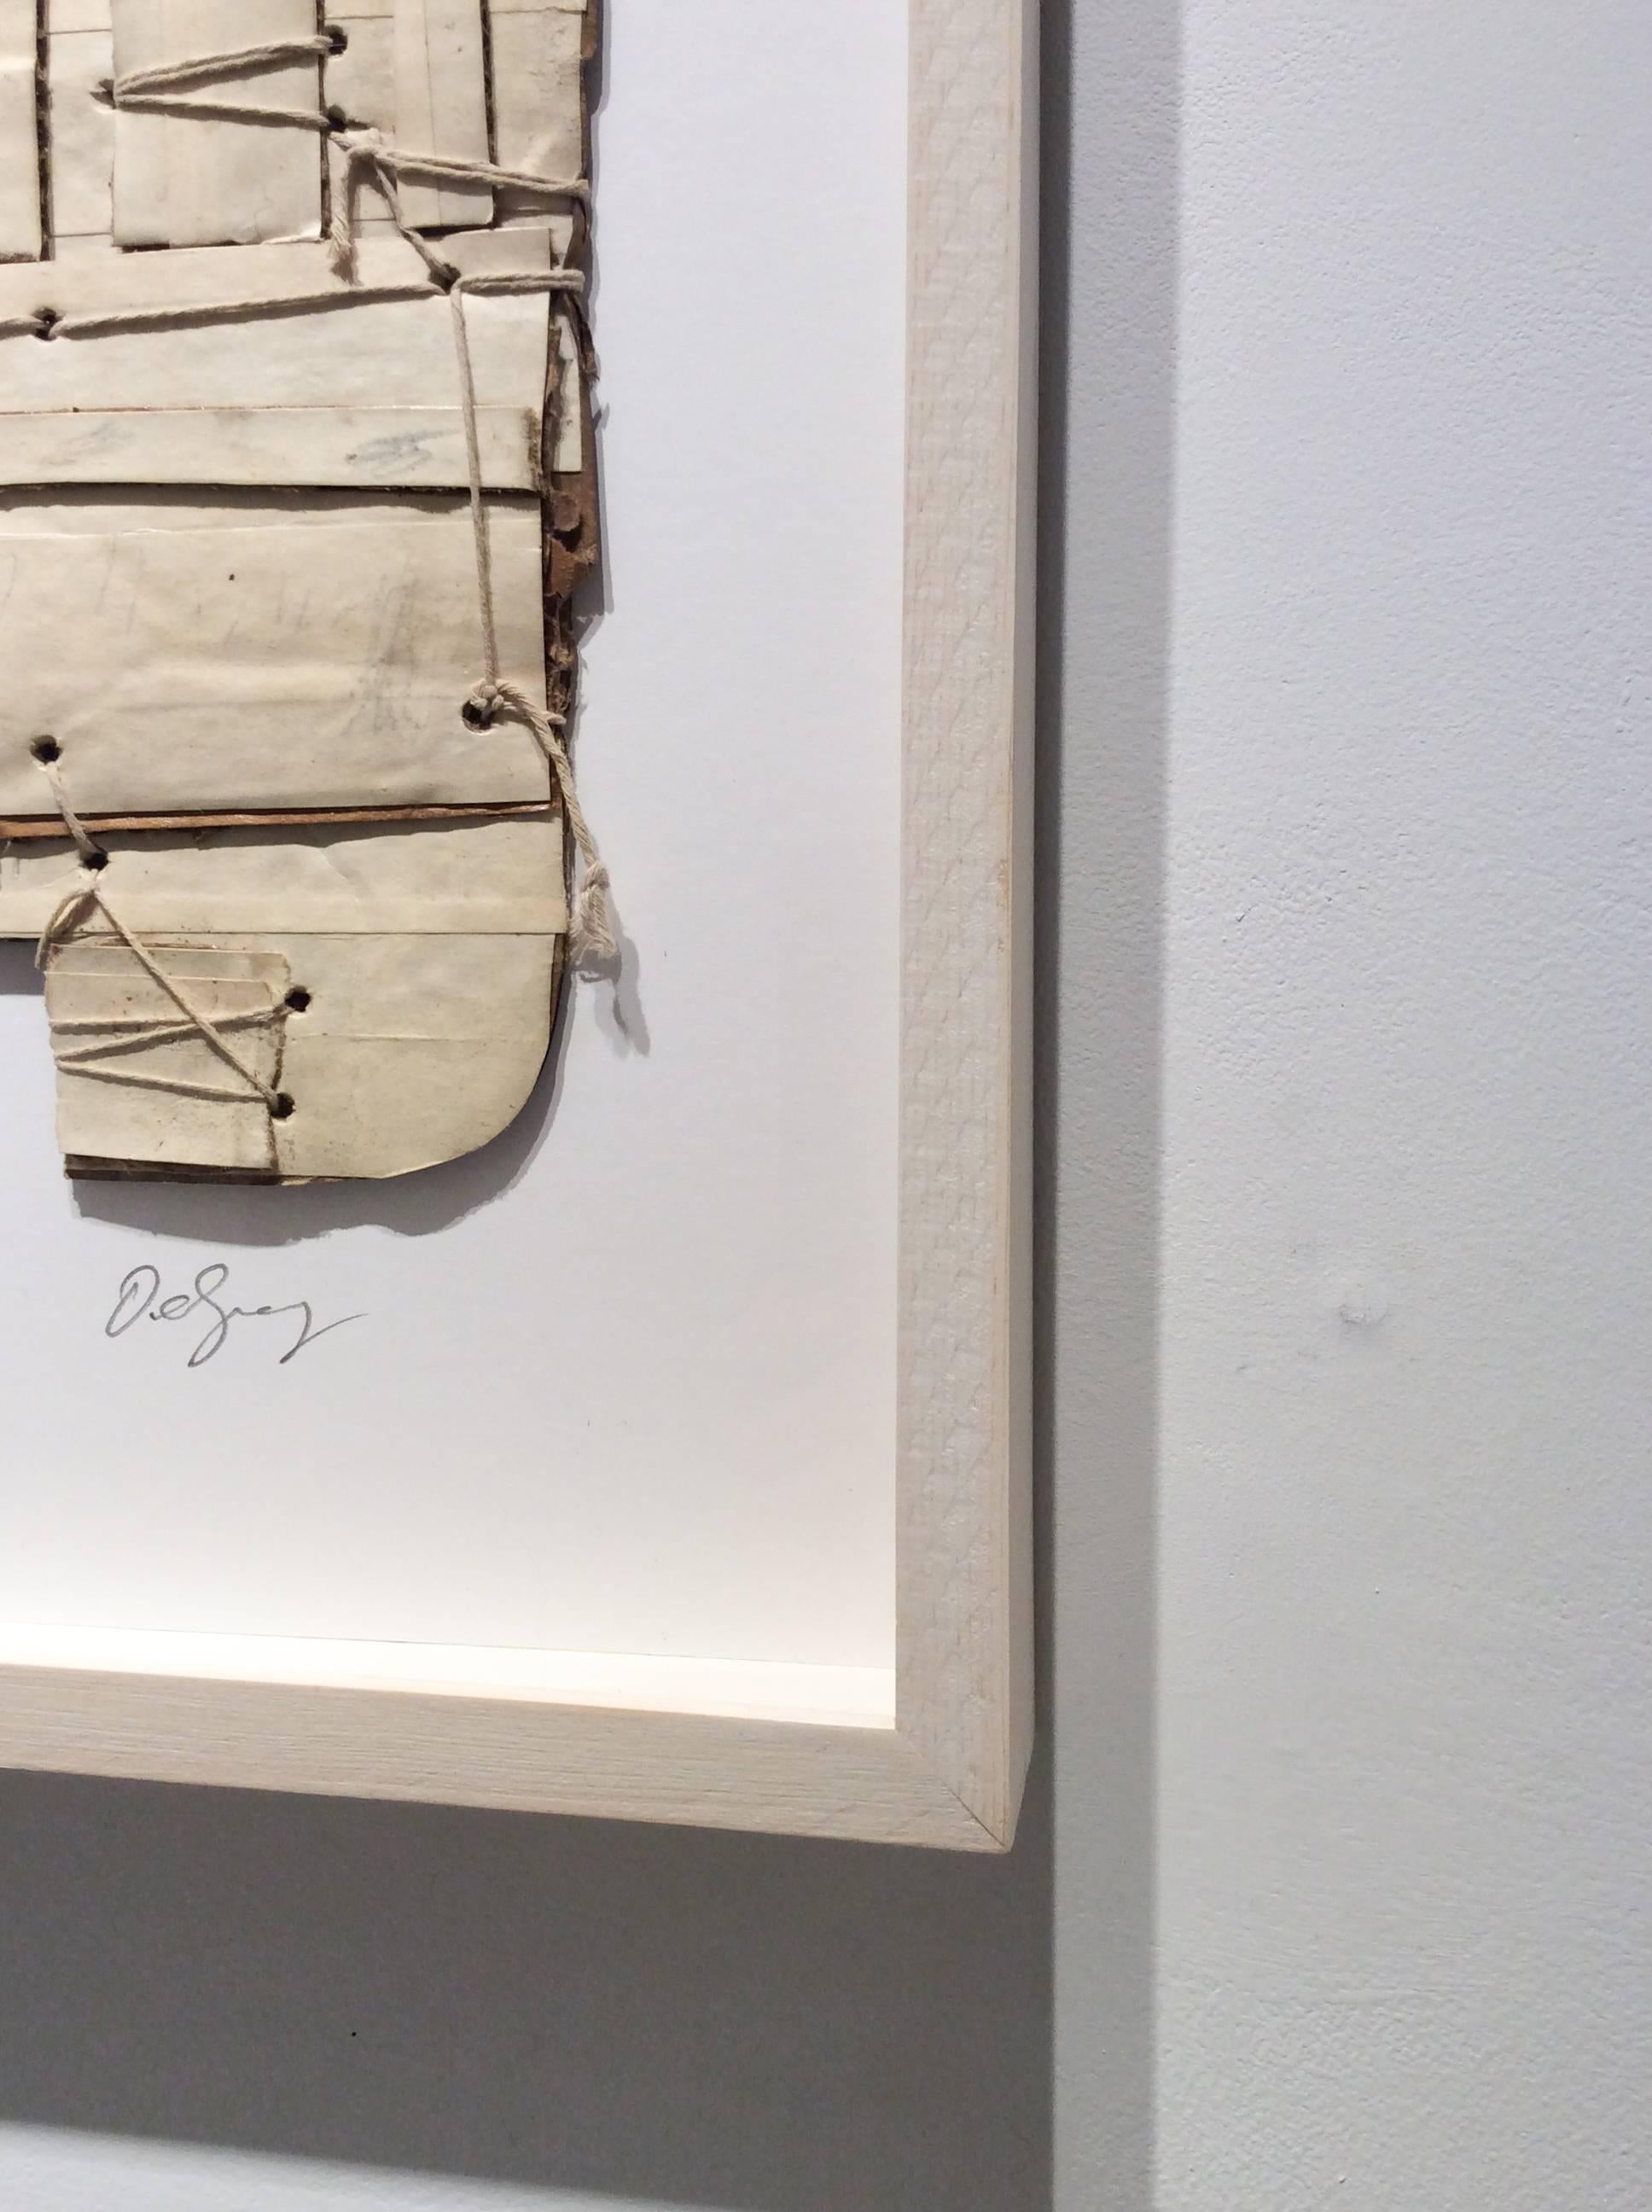 Upstate (White): Contemporary Mixed Media Cardboard Construction with String 2